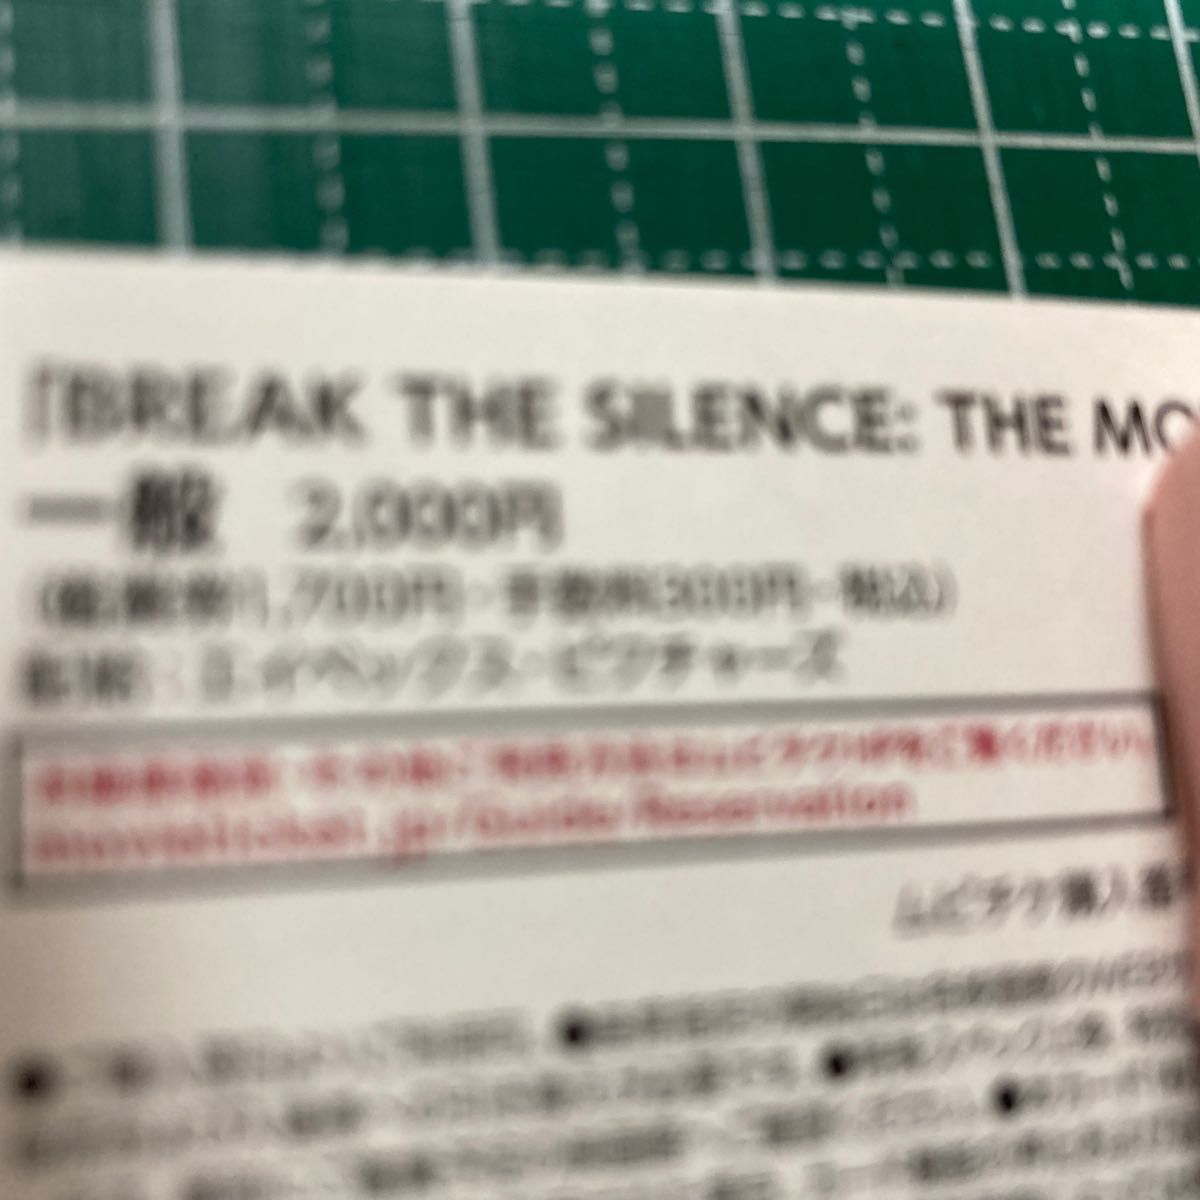 BTS AREAK THE SILENCE THE MOVIE ムビチケ　使用済　